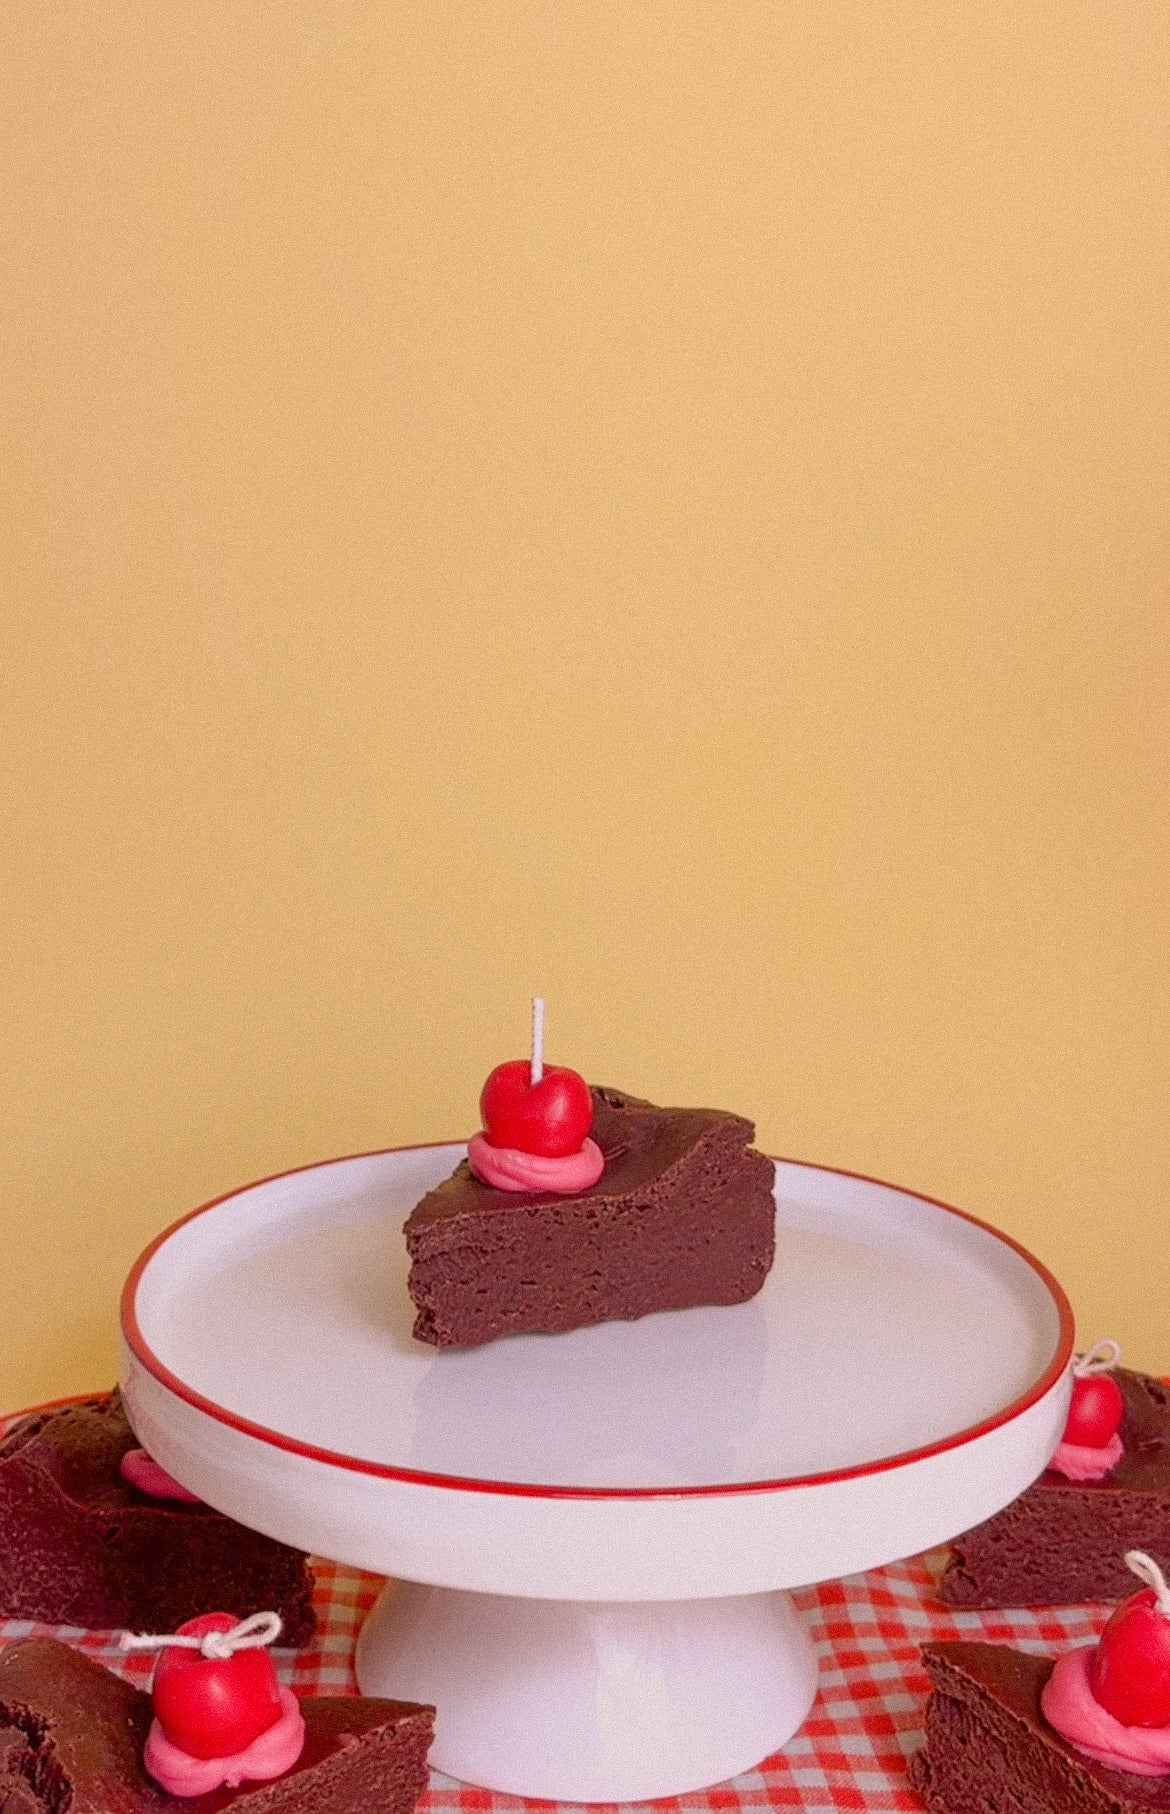 Bizcochito Chocolate - Chocolate Cake Candle by The Wednesday Co